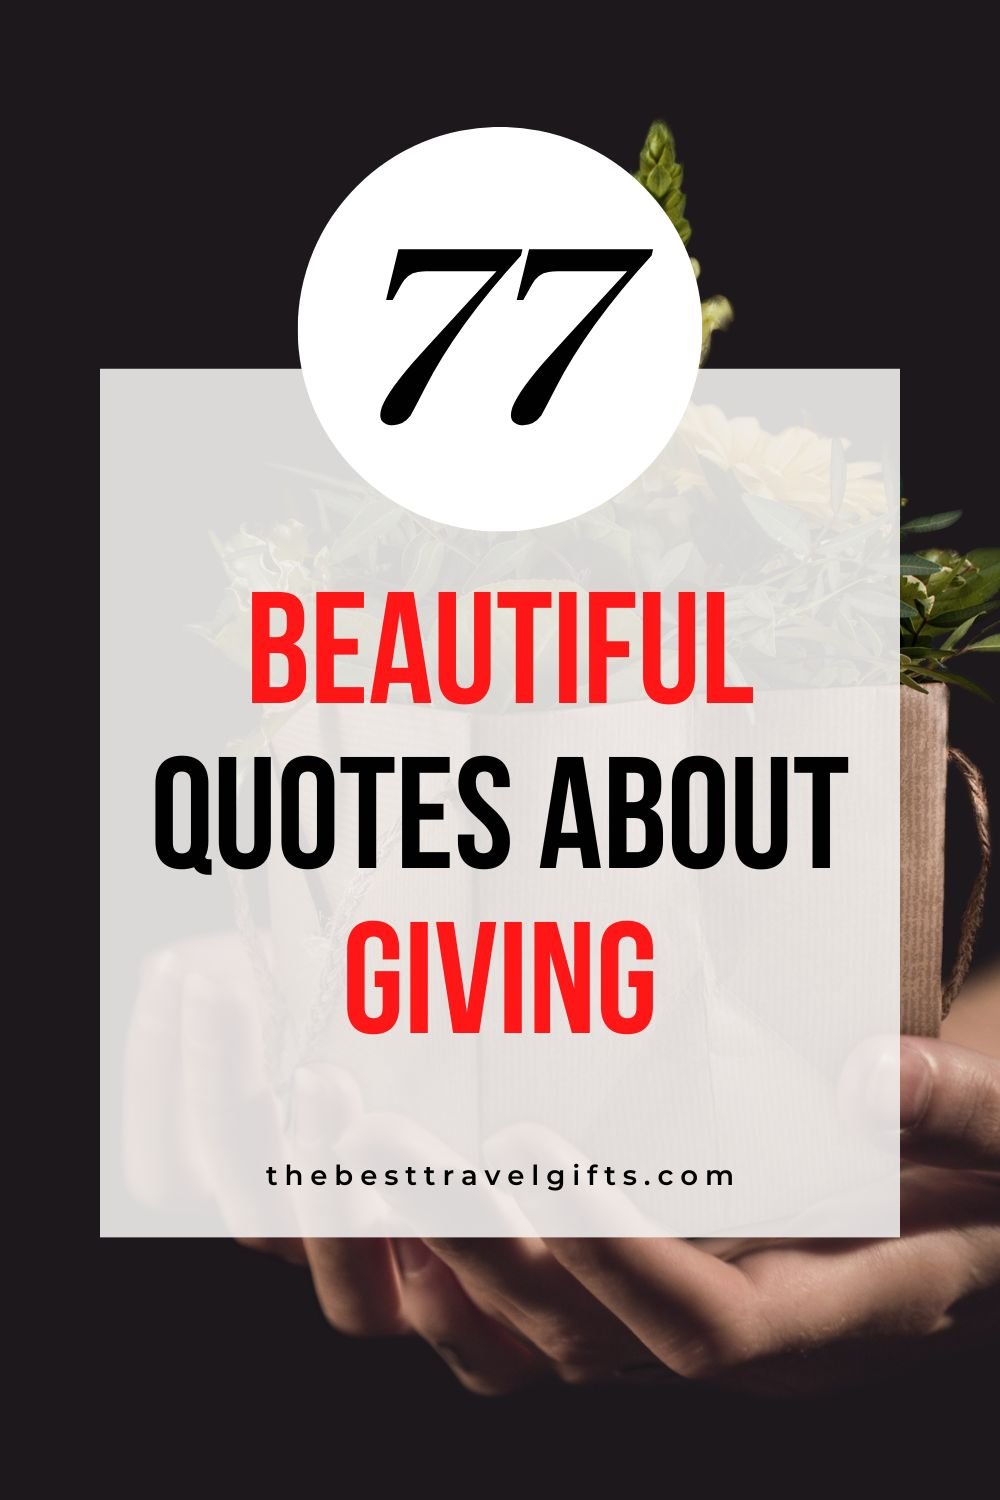 77 Beautiful quotes about giving